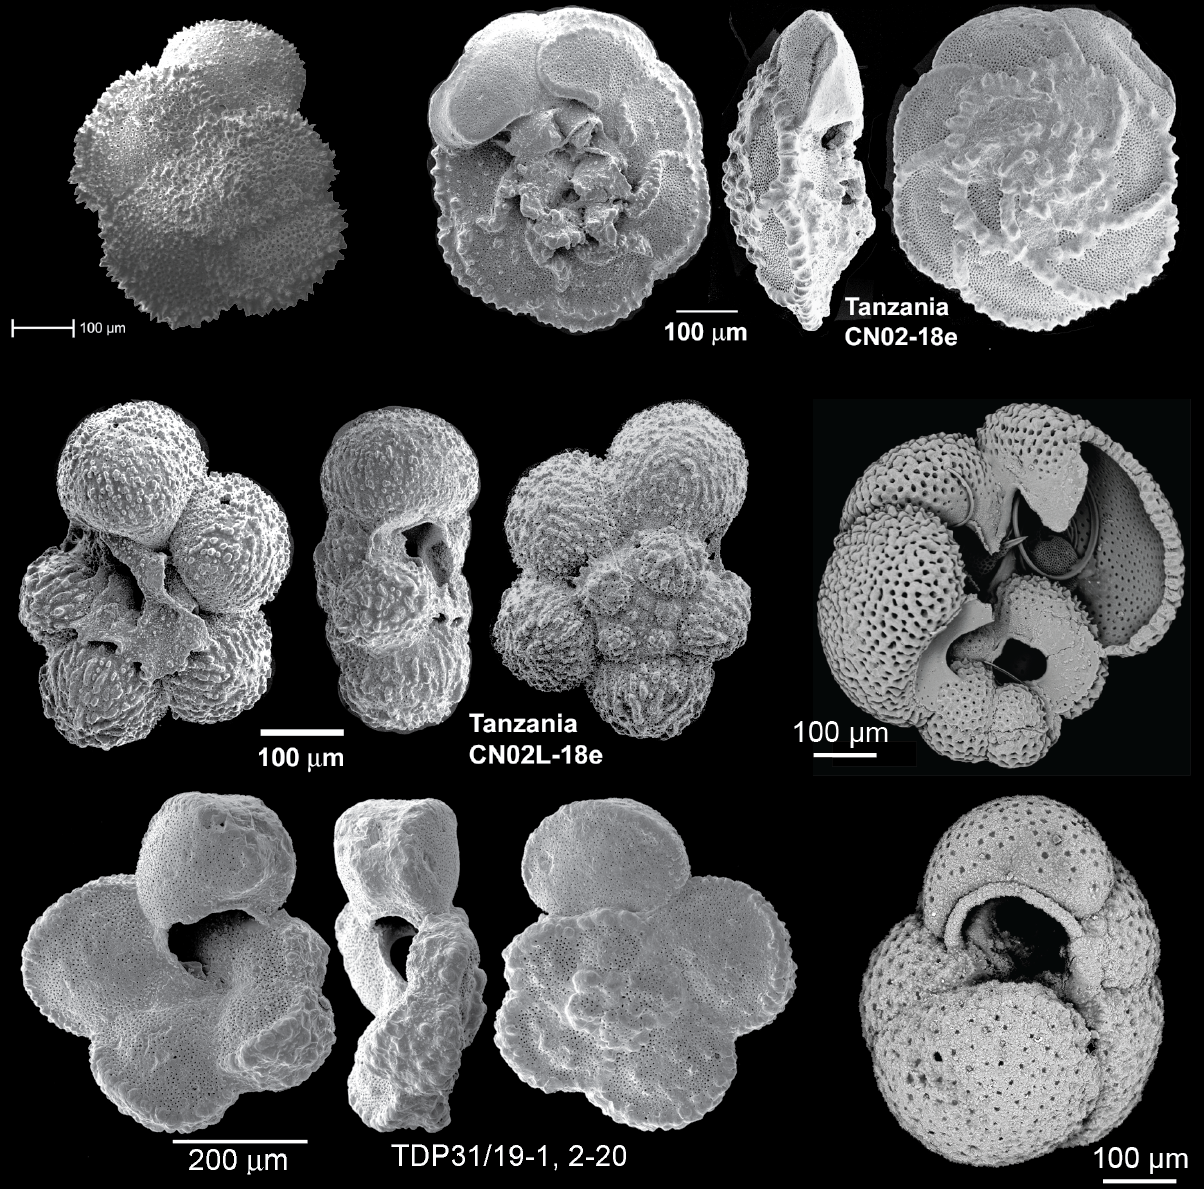 Various scanning electron images of fossil planktic foraminifera. (Image: Images courtesy of Megan Fung, Brian Huber, and Lam and Leckie (2020).)